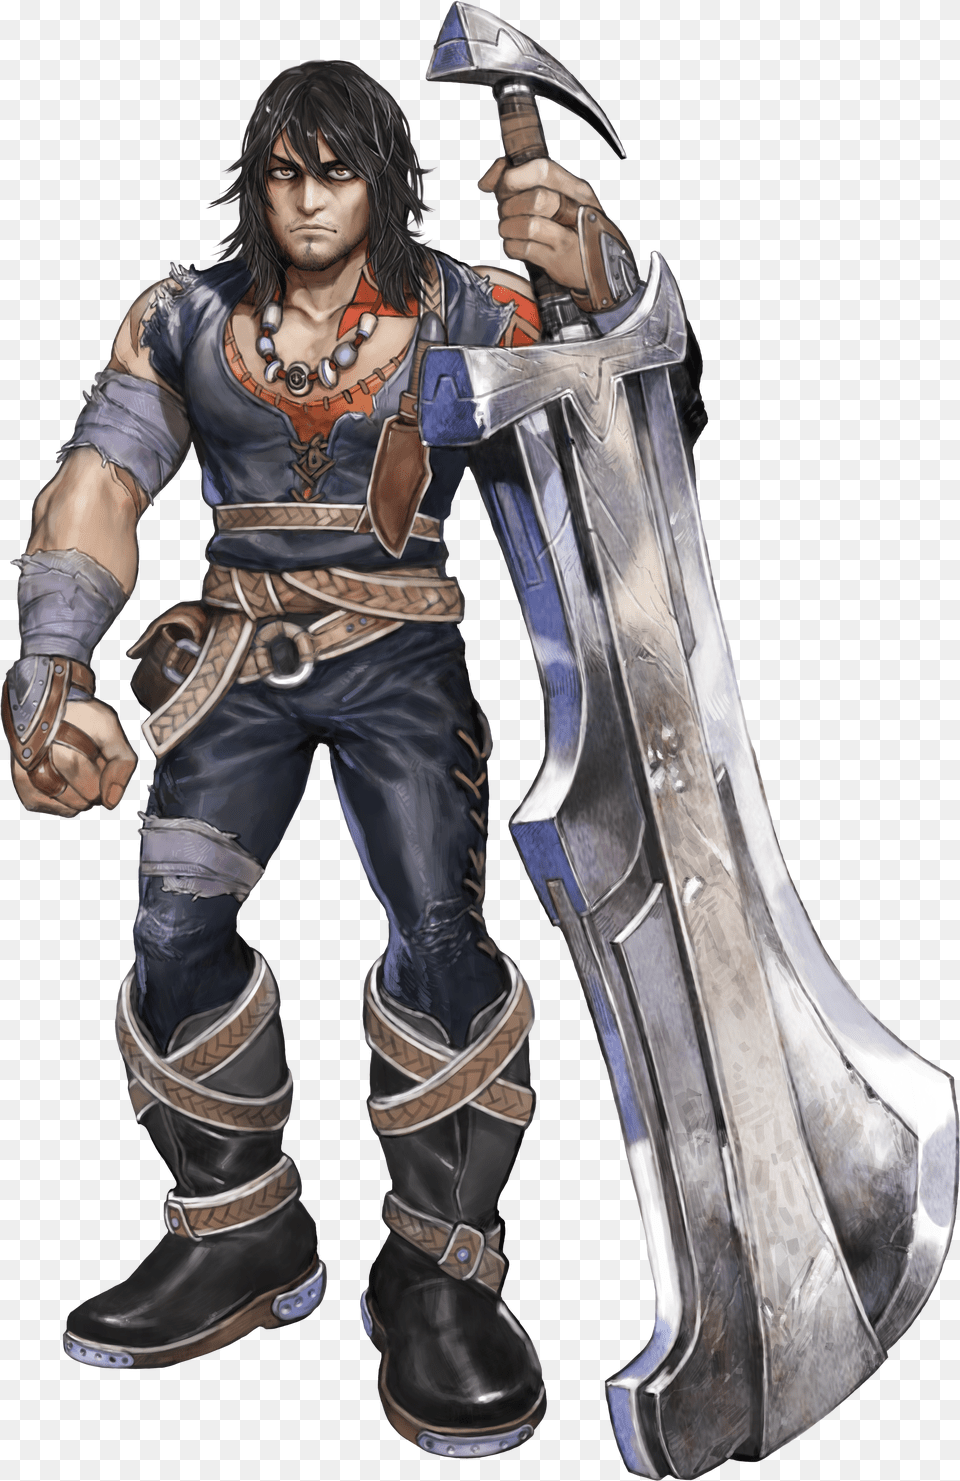 Magna The Mercenary Is One Of Your Most Powerful Allies Kid Icarus Uprising Magnus Png Image